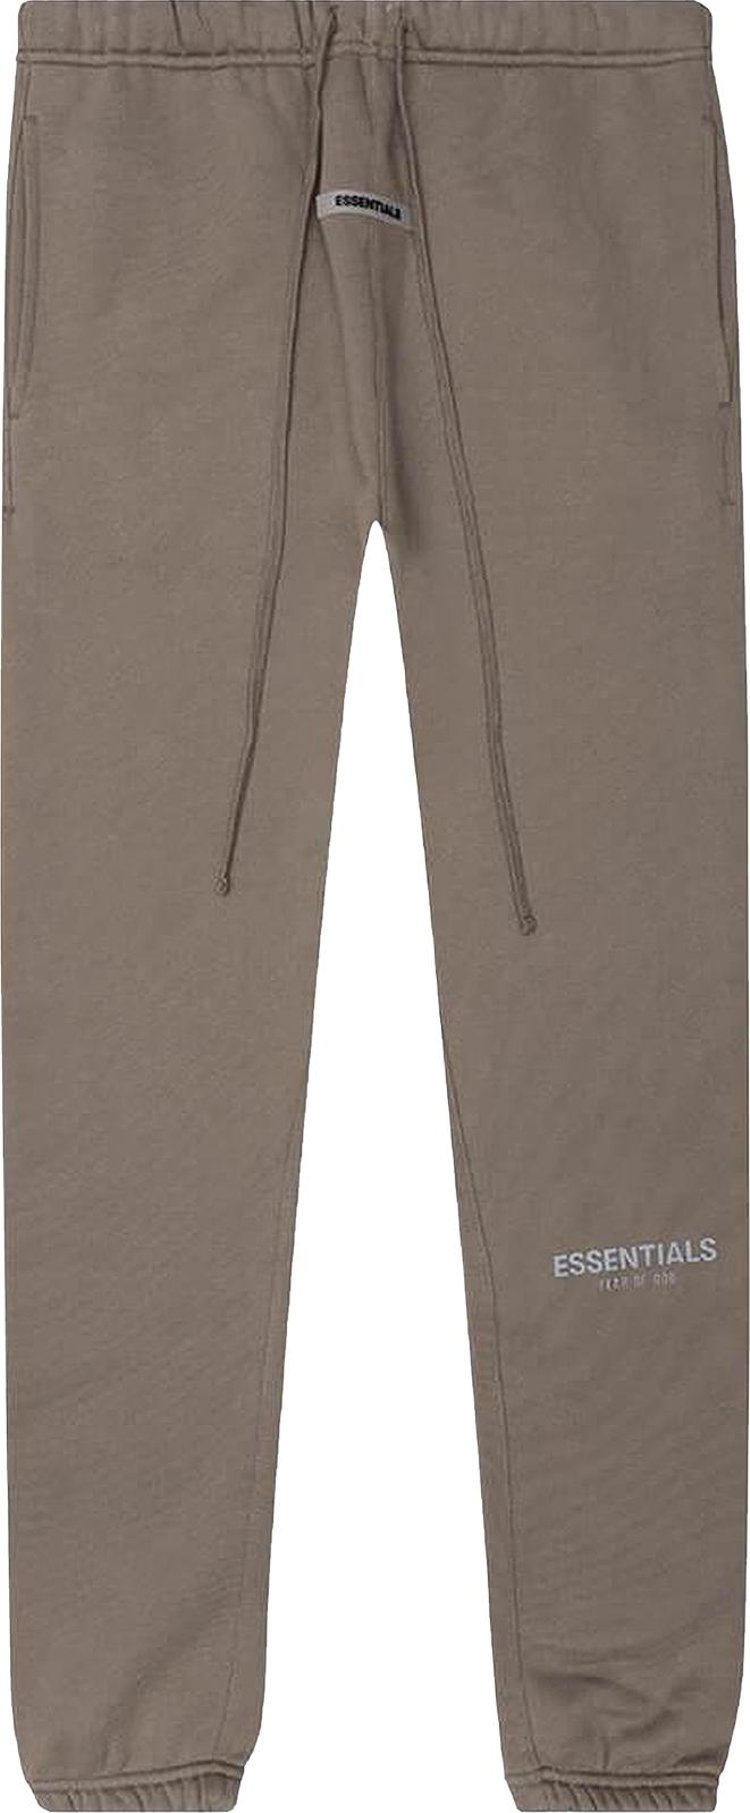 Fear of God Essentials Sweatpants 'Taupe'